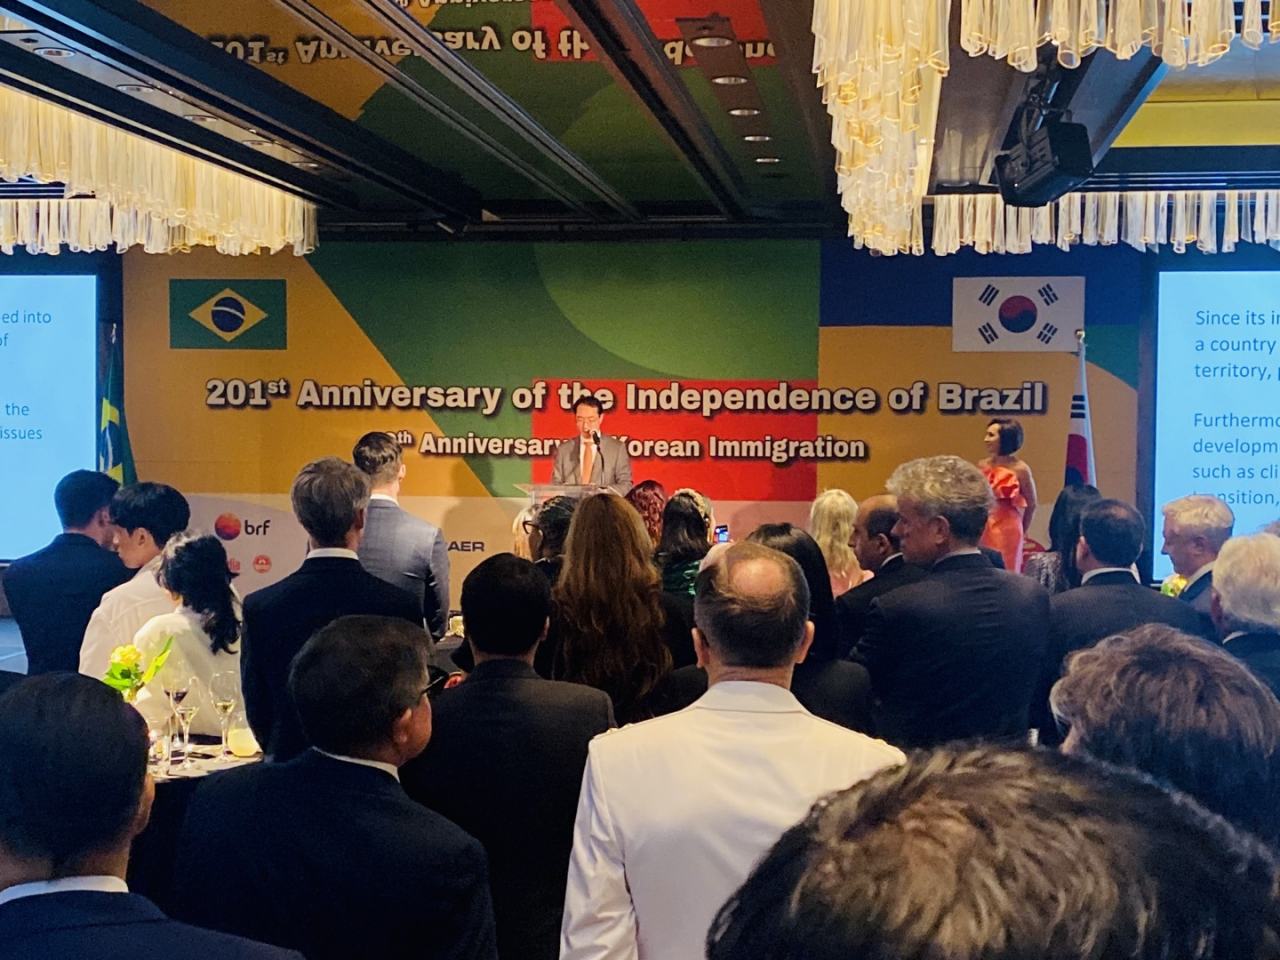 Guests attend Brazil's 201st anniversary of independence at the Four Seasons Hotel in Jung-gu, Seul on Wednesday. (Sanjay Kumar/The Korea Herald)